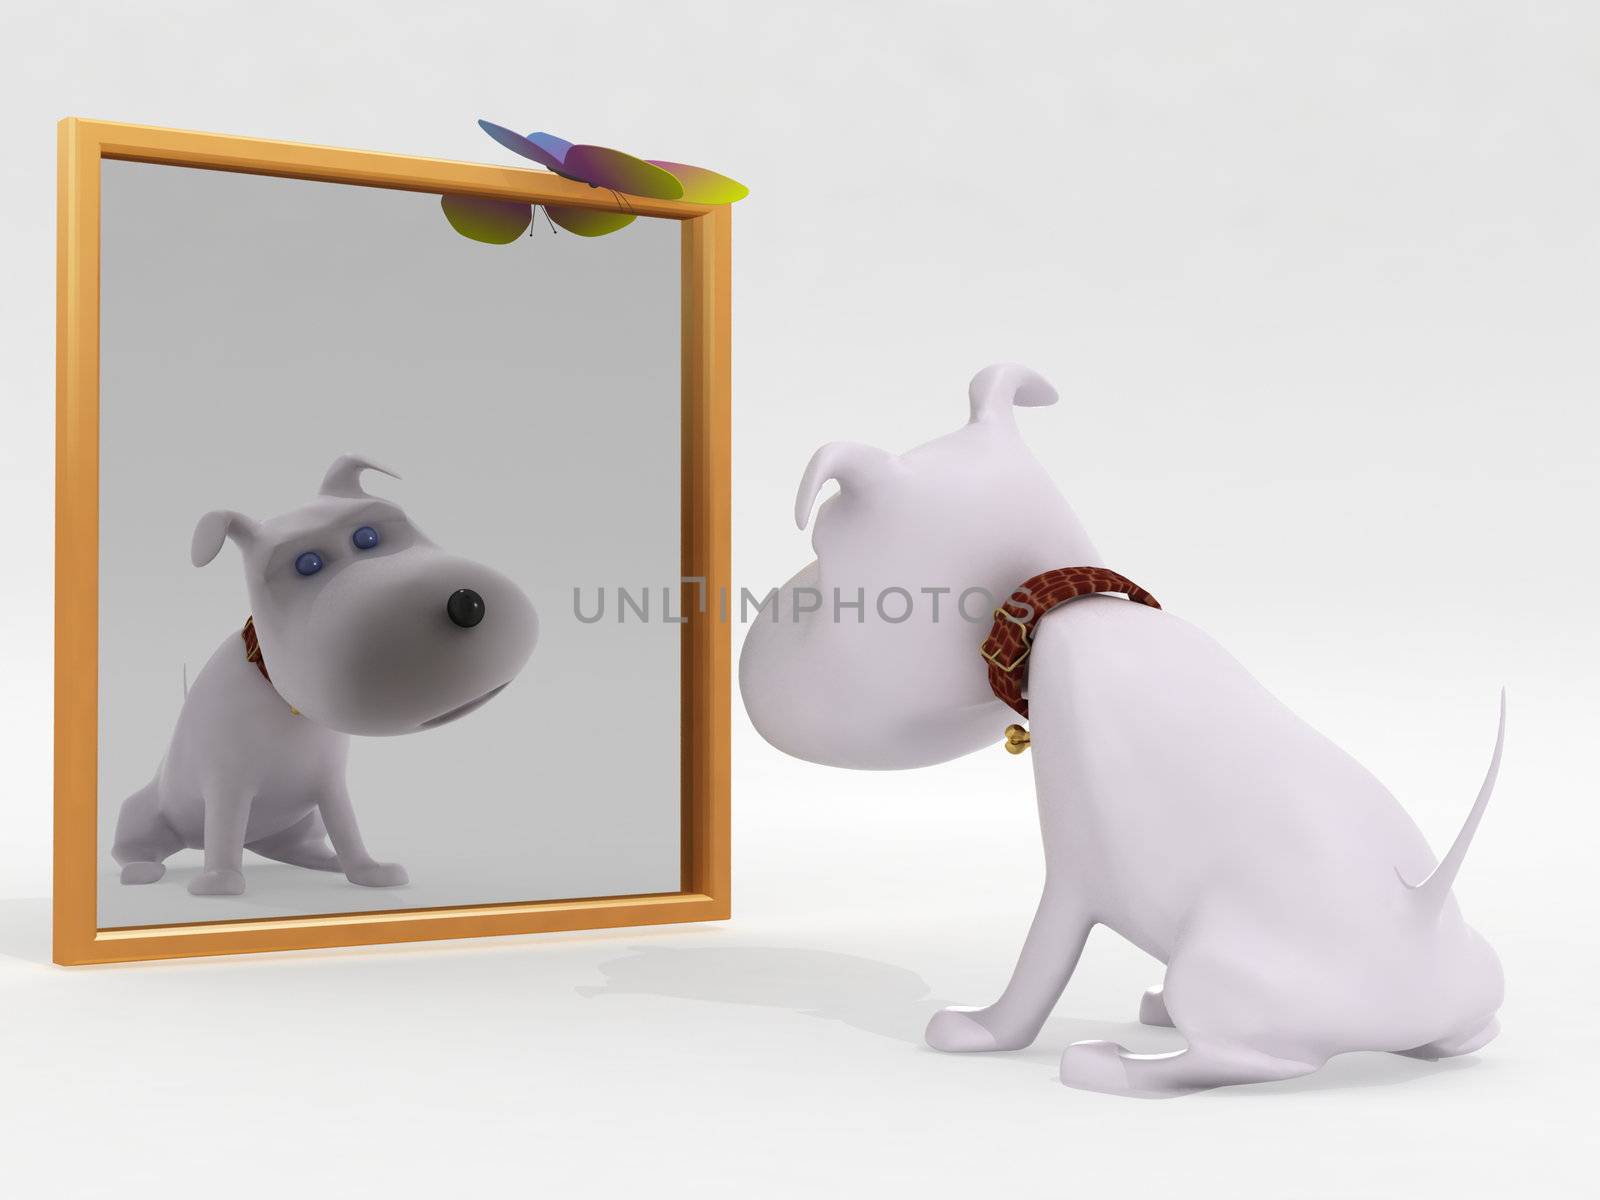 Dog and mirror by pavelblag